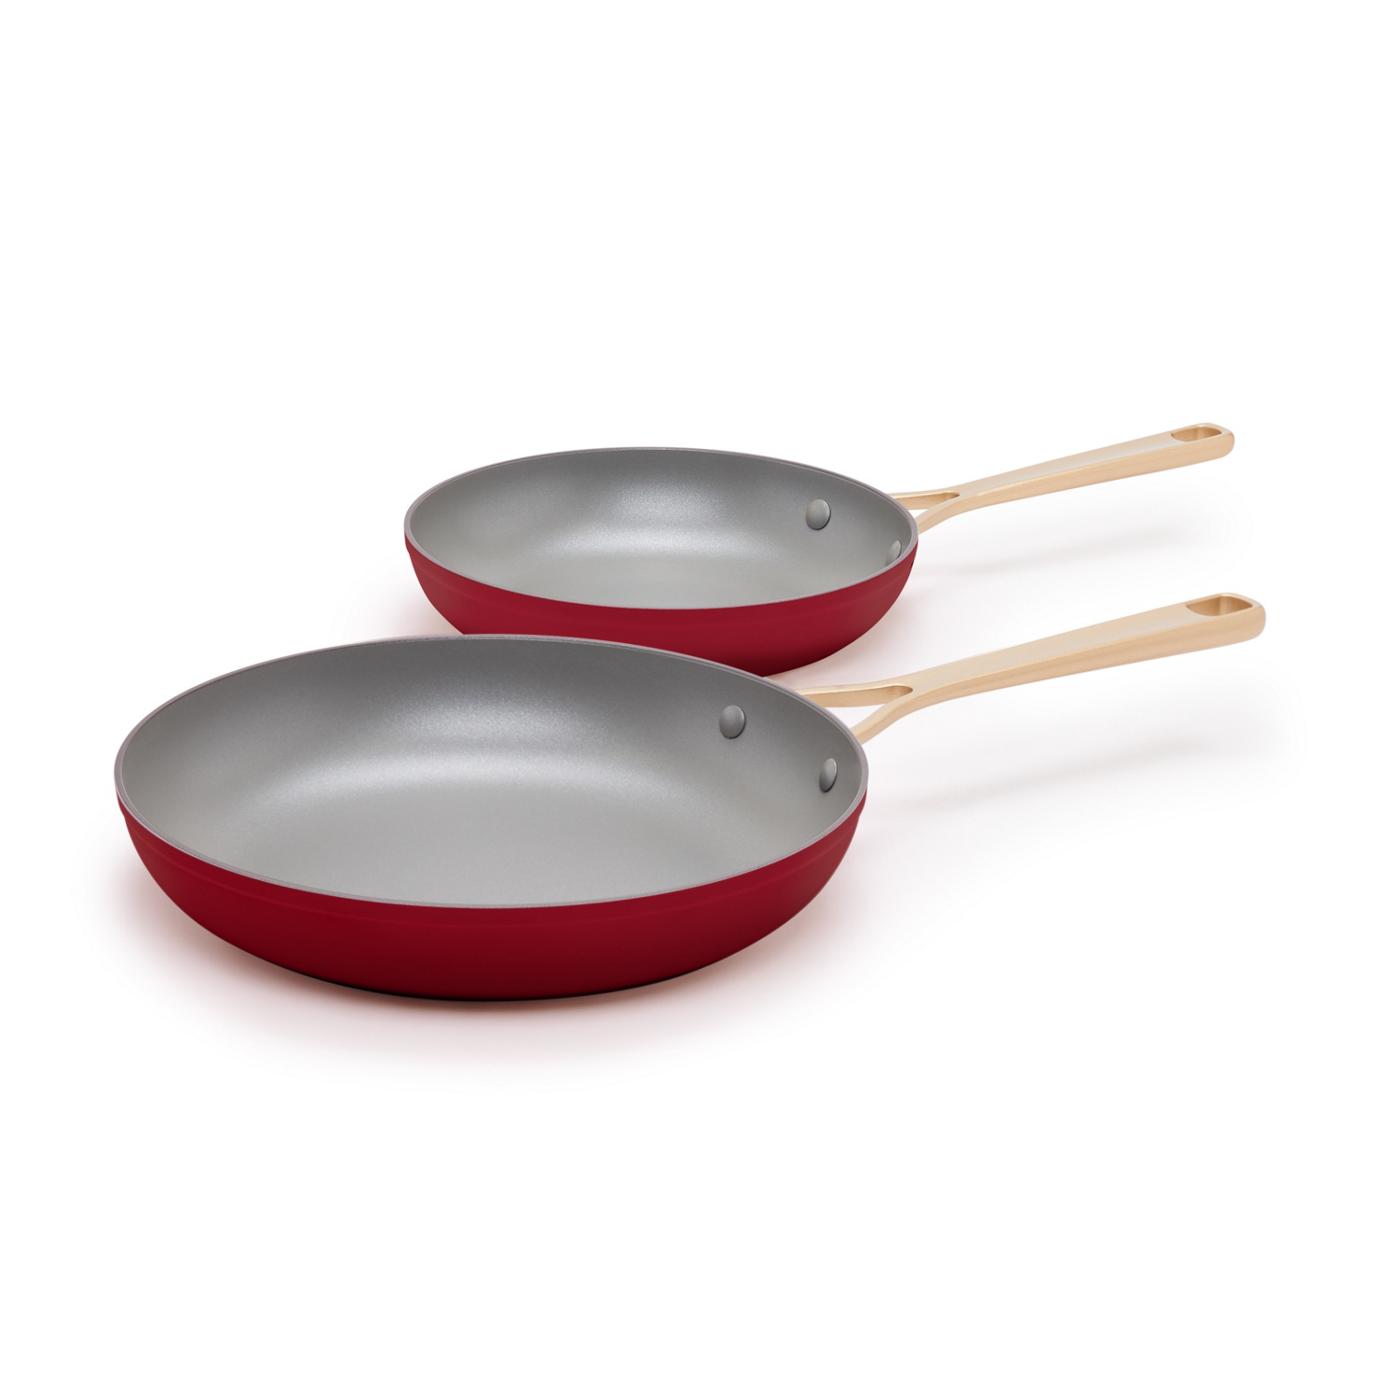 Kitchen & Table by H-E-B Non-Stick Fry Pans - Bordeaux Red; image 1 of 3